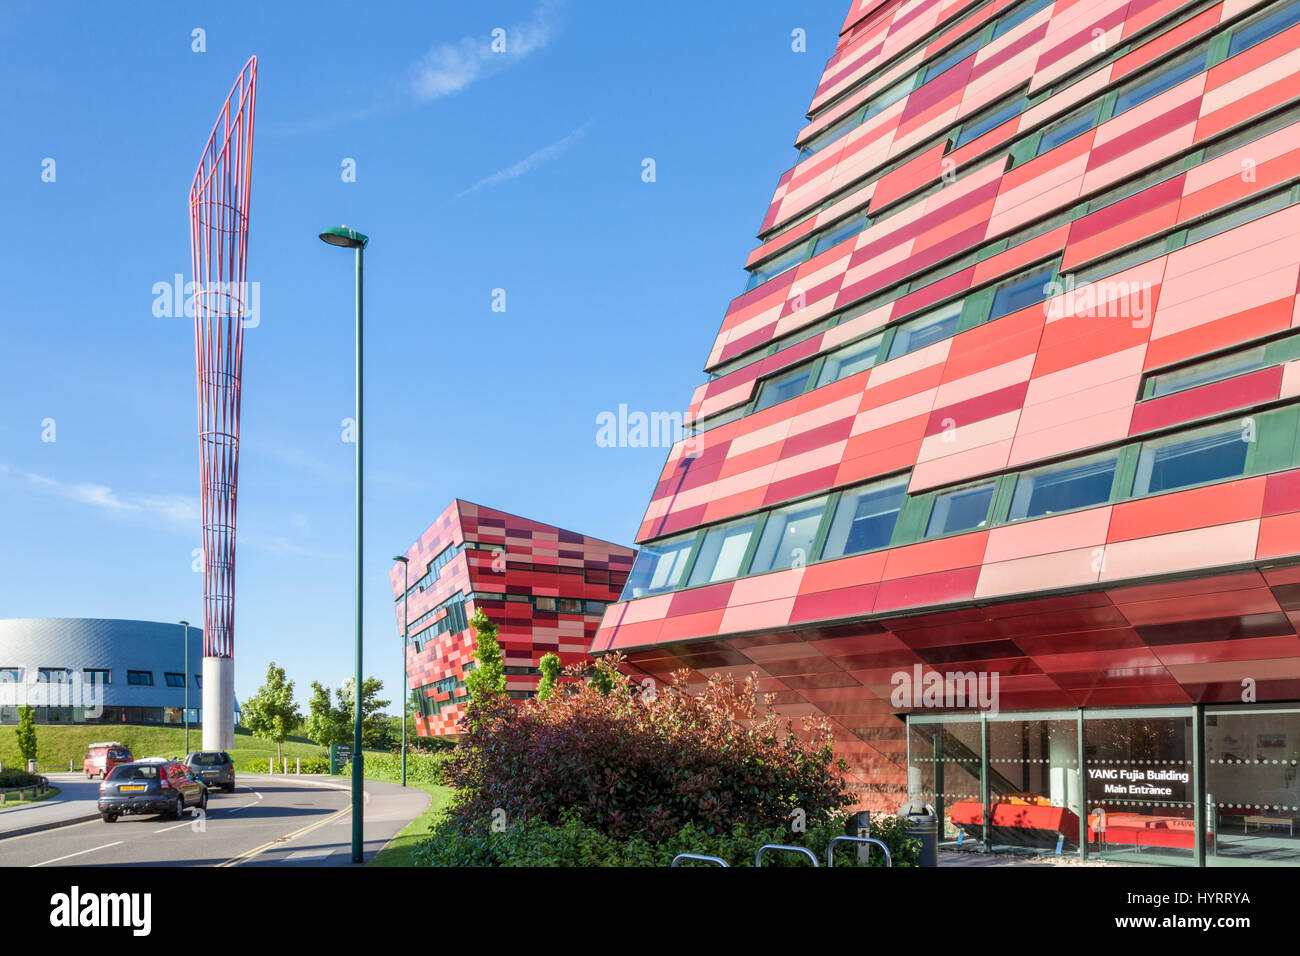 YANG Fujia Building and other structures on Innovation Park at the Jubilee Campus, University of Nottingham, Nottingham, England, UK Stock Photo